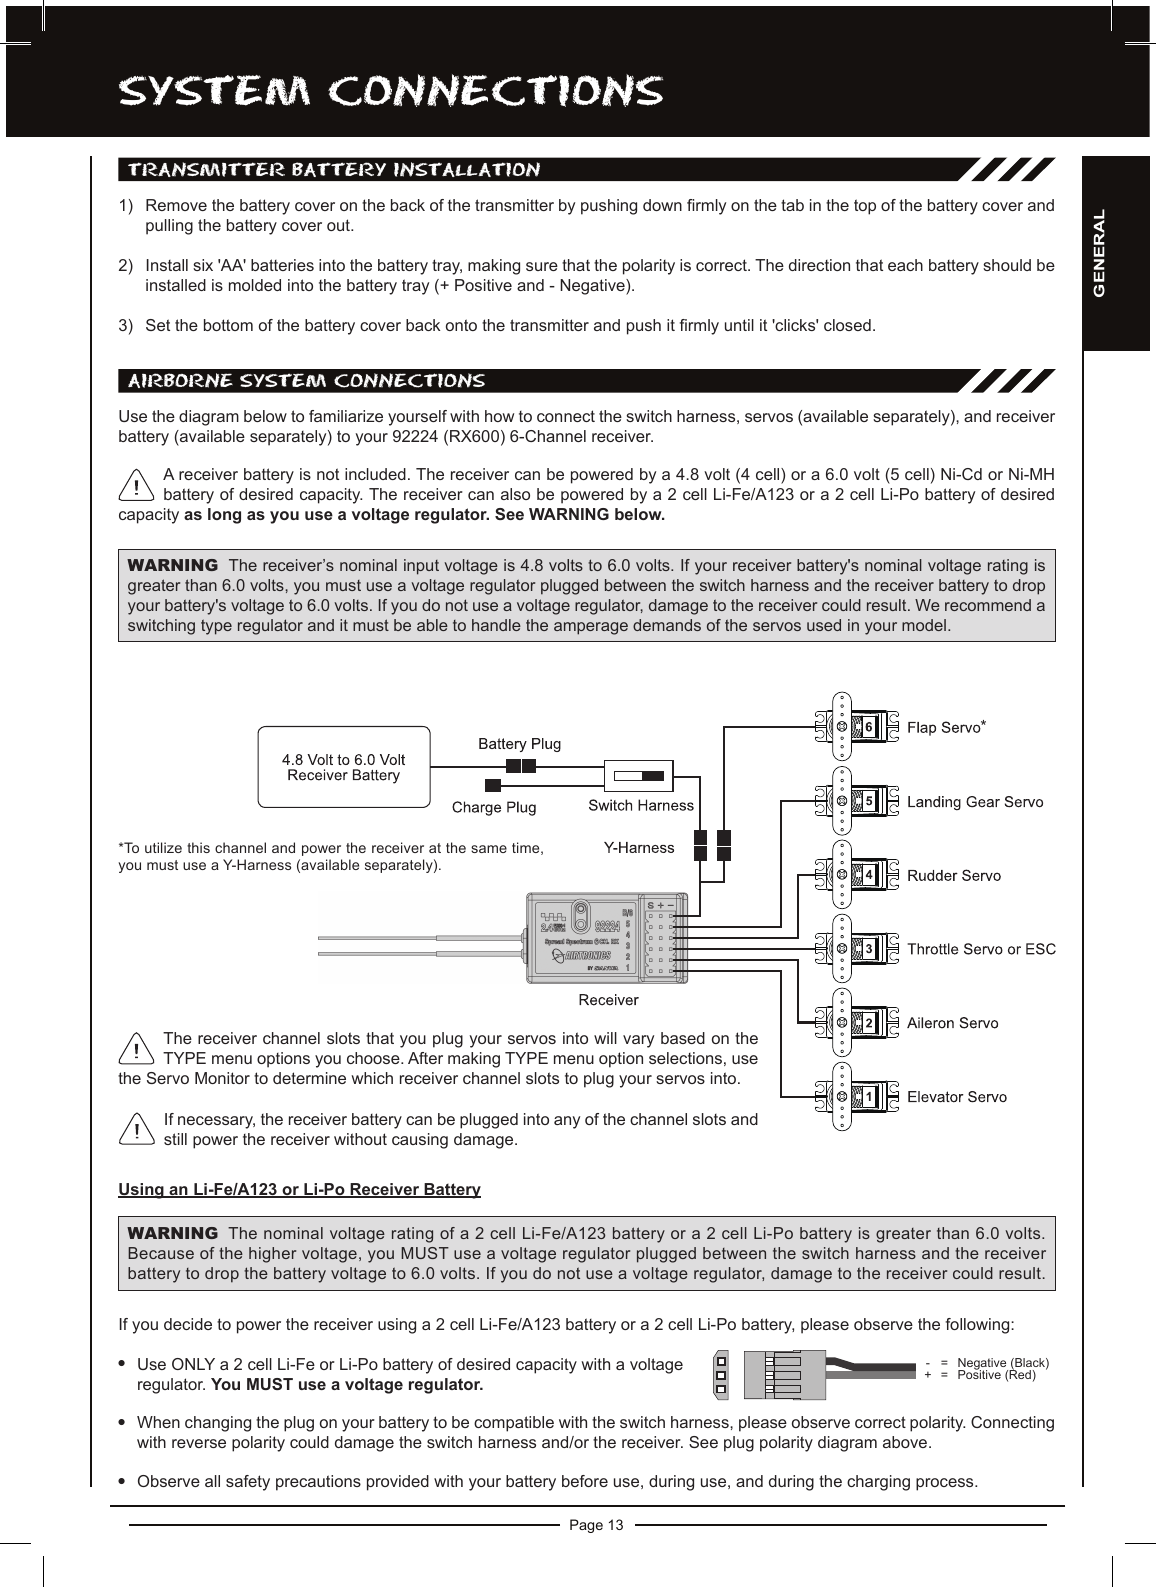 Page 13SySTEM cOnnEcTiOnSUse the diagram below to familiarize yourself with how to connect the switch harness, servos (available separately), and receiver battery (available separately) to your 92224 (RX600) 6-Channel receiver.A receiver battery is not included. The receiver can be powered by a 4.8 volt (4 cell) or a 6.0 volt (5 cell) Ni-Cd or Ni-MH battery of desired capacity. The receiver can also be powered by a 2 cell Li-Fe/A123 or a 2 cell Li-Po battery of desired capacity as long as you use a voltage regulator. See WARNING below.WARNING The receiver’s nominal input voltage is 4.8 volts to 6.0 volts. If your receiver battery&apos;s nominal voltage rating is greater than 6.0 volts, you must use a voltage regulator plugged between the switch harness and the receiver battery to drop your battery&apos;s voltage to 6.0 volts. If you do not use a voltage regulator, damage to the receiver could result. We recommend a switching type regulator and it must be able to handle the amperage demands of the servos used in your model.If you decide to power the receiver using a 2 cell Li-Fe/A123 battery or a 2 cell Li-Po battery, please observe the following:lUse ONLY a 2 cell Li-Fe or Li-Po battery of desired capacity with a voltageregulator. You MUST use a voltage regulator.lWhen changing the plug on your battery to be compatible with the switch harness, please observe correct polarity. Connecting with reverse polarity could damage the switch harness and/or the receiver. See plug polarity diagram above.lObserve all safety precautions provided with your battery before use, during use, and during the charging process.WARNING The nominal voltage rating of a 2 cell Li-Fe/A123 battery or a 2 cell Li-Po battery is greater than 6.0 volts. Because of the higher voltage, you MUST use a voltage regulator plugged between the switch harness and the receiver battery to drop the battery voltage to 6.0 volts. If you do not use a voltage regulator, damage to the receiver could result.-  = Negative (Black)+ = Positive (Red)TRanSMiTTER BaTTERy inSTaLLaTiOn1)  Remove the battery cover on the back of the transmitter by pushing down rmly on the tab in the top of the battery cover and pulling the battery cover out.2) Install six &apos;AA&apos; batteries into the battery tray, making sure that the polarity is correct. The direction that each battery should be installed is molded into the battery tray (+ Positive and - Negative).3) Set the bottom of the battery cover back onto the transmitter and push it rmly until it &apos;clicks&apos; closed. aiRBORnE SySTEM cOnnEcTiOnSUsing an Li-Fe/A123 or Li-Po Receiver BatteryIf necessary, the receiver battery can be plugged into any of the channel slots and still power the receiver without causing damage. **To utilize this channel and power the receiver at the same time, you must use a Y-Harness (available separately).The receiver channel slots that you plug your servos into will vary based on the TYPE menu options you choose. After making TYPE menu option selections, use the Servo Monitor to determine which receiver channel slots to plug your servos into. GENERAL